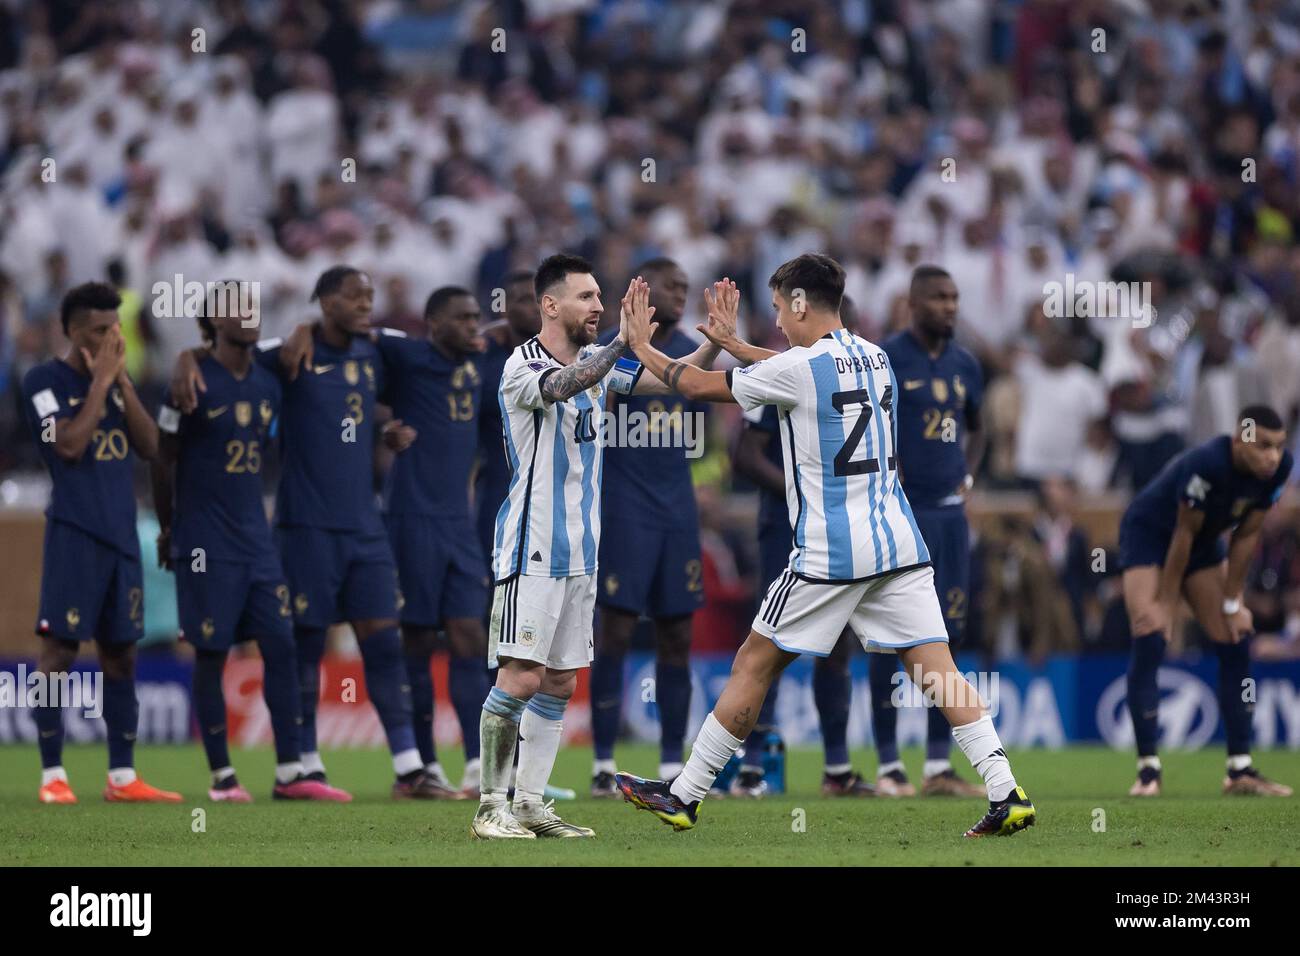 Doha, Brazil. 18th Dec, 2022. Qatar - Doha - 12/18/2022 - 2022 WORLD CUP FINAL, ARGENTINA X FRANCE - Messi and Dybala Argentina players celebrate a goal scored from the penalty spot during a match against France at the Lusail stadium for the 2022 World Cup championship. Photo: Pedro Martins/AGIF/Sipa USA Credit: Sipa USA/Alamy Live News Stock Photo